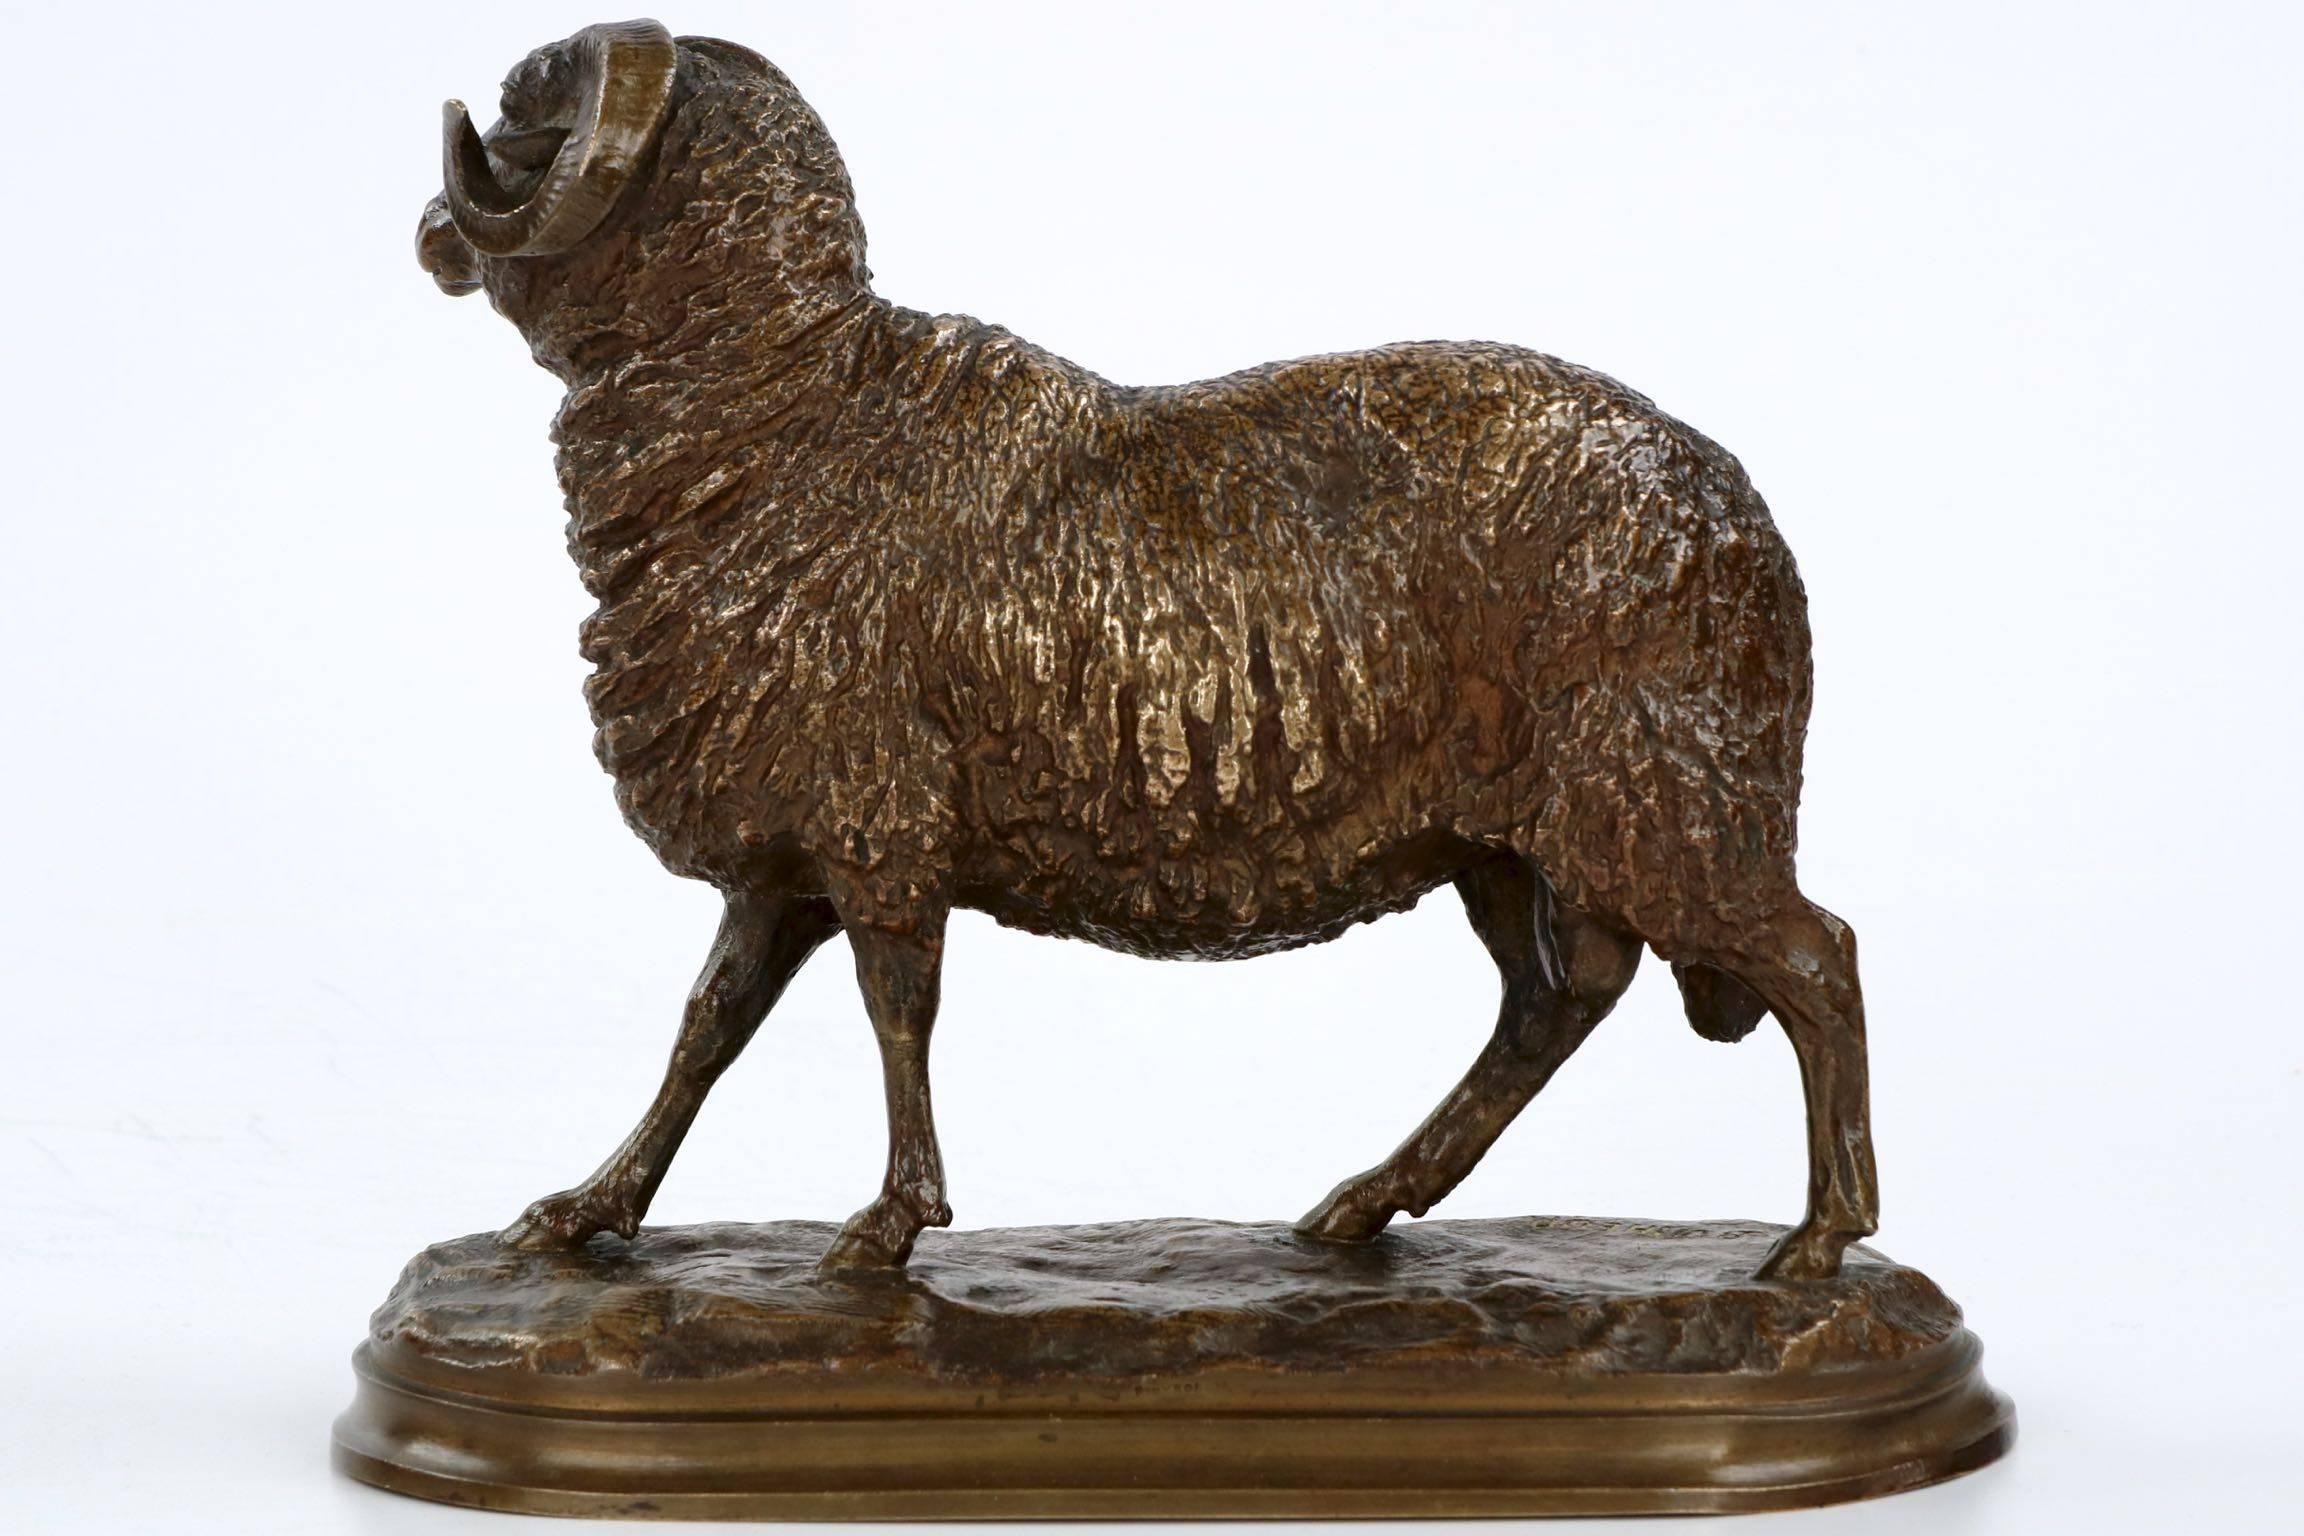 French Antique Bronze Sculpture of Ram by Isidore Bonheur & Peyrol Foundry, circa 1870